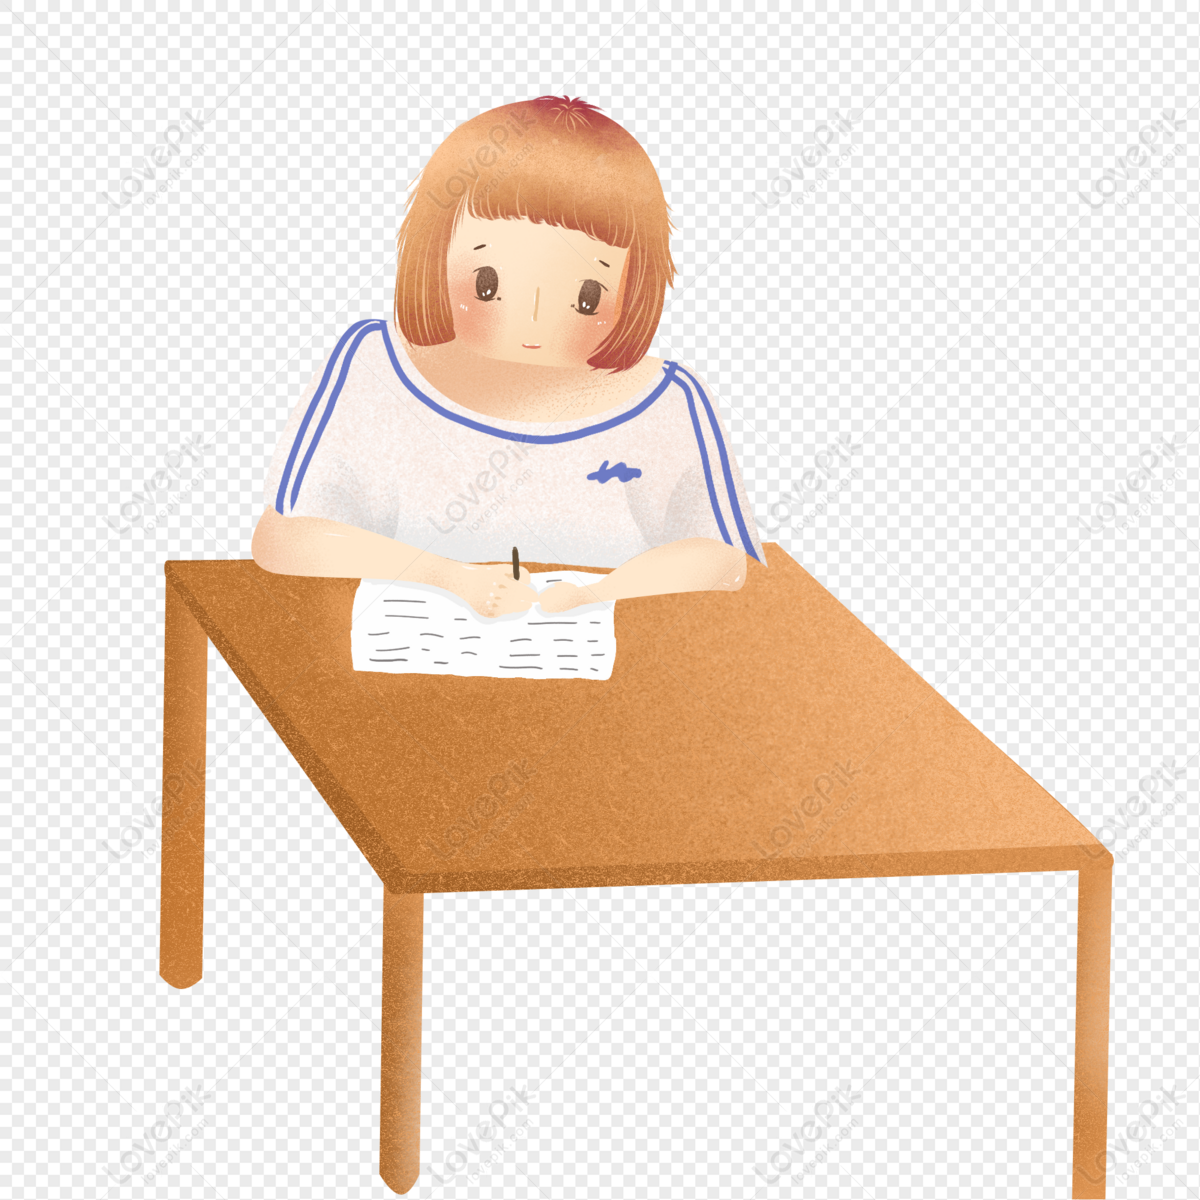 Students write homework during the start of the school season, and homework, free of charge, school start png image